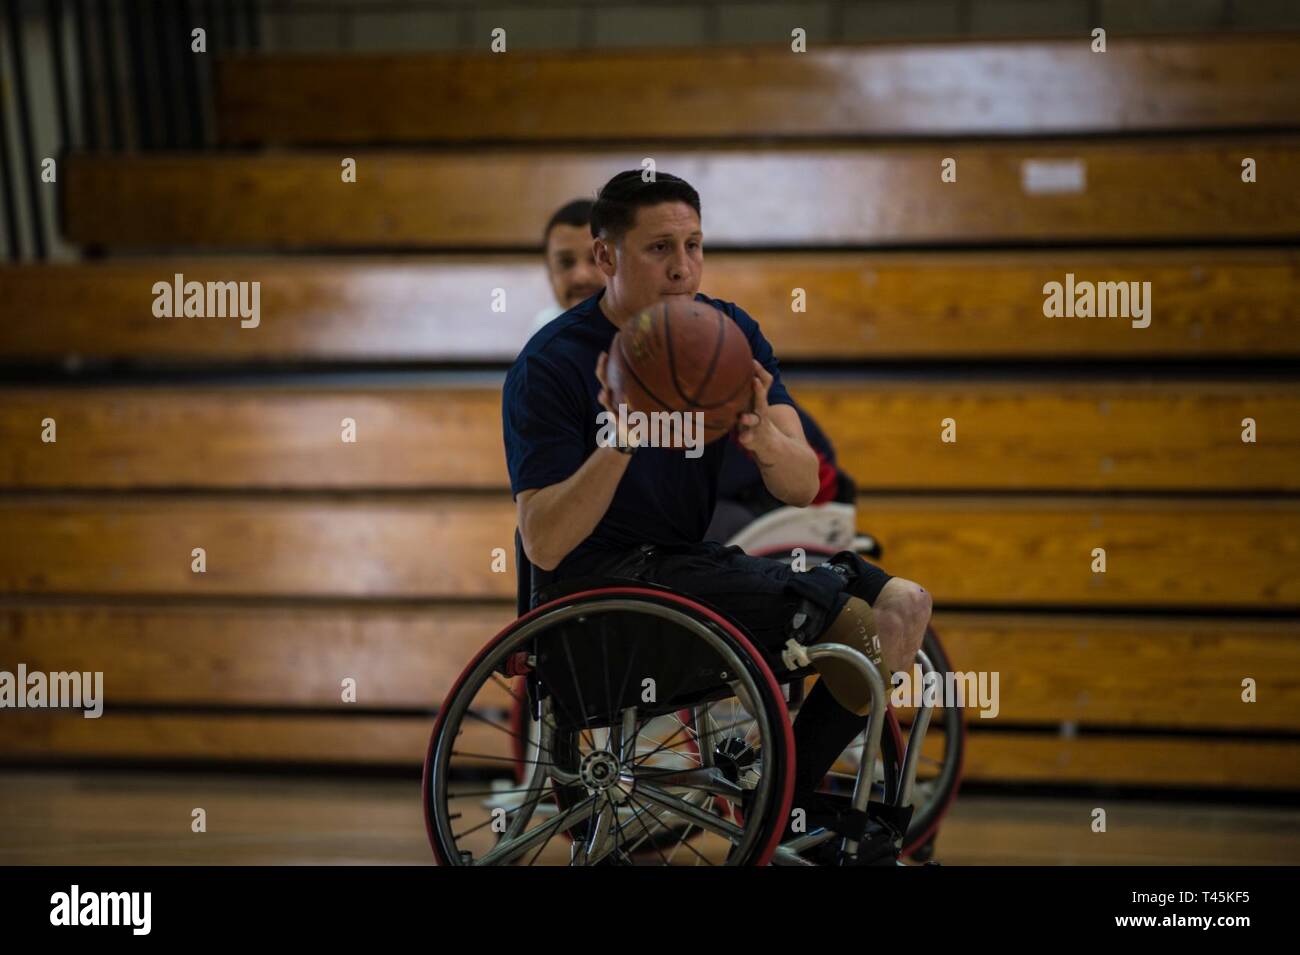 Staff Sgt. Jason Pacheco moves the ball down court during a 2019 Marine Corps Trials wheelchair basketball practice session at Marine Corps Base Camp Pendleton, California, March 1. The Marine Corps Trials promotes recovery and rehabilitation through adaptive sports participation and develops camaraderie among recovering service members and veterans. Additionally, the competition is an opportunity for participants to demonstrate physical and mental achievements and serves as the primary venue to select Marine Corps participants for the DoD Warrior Games. Stock Photo